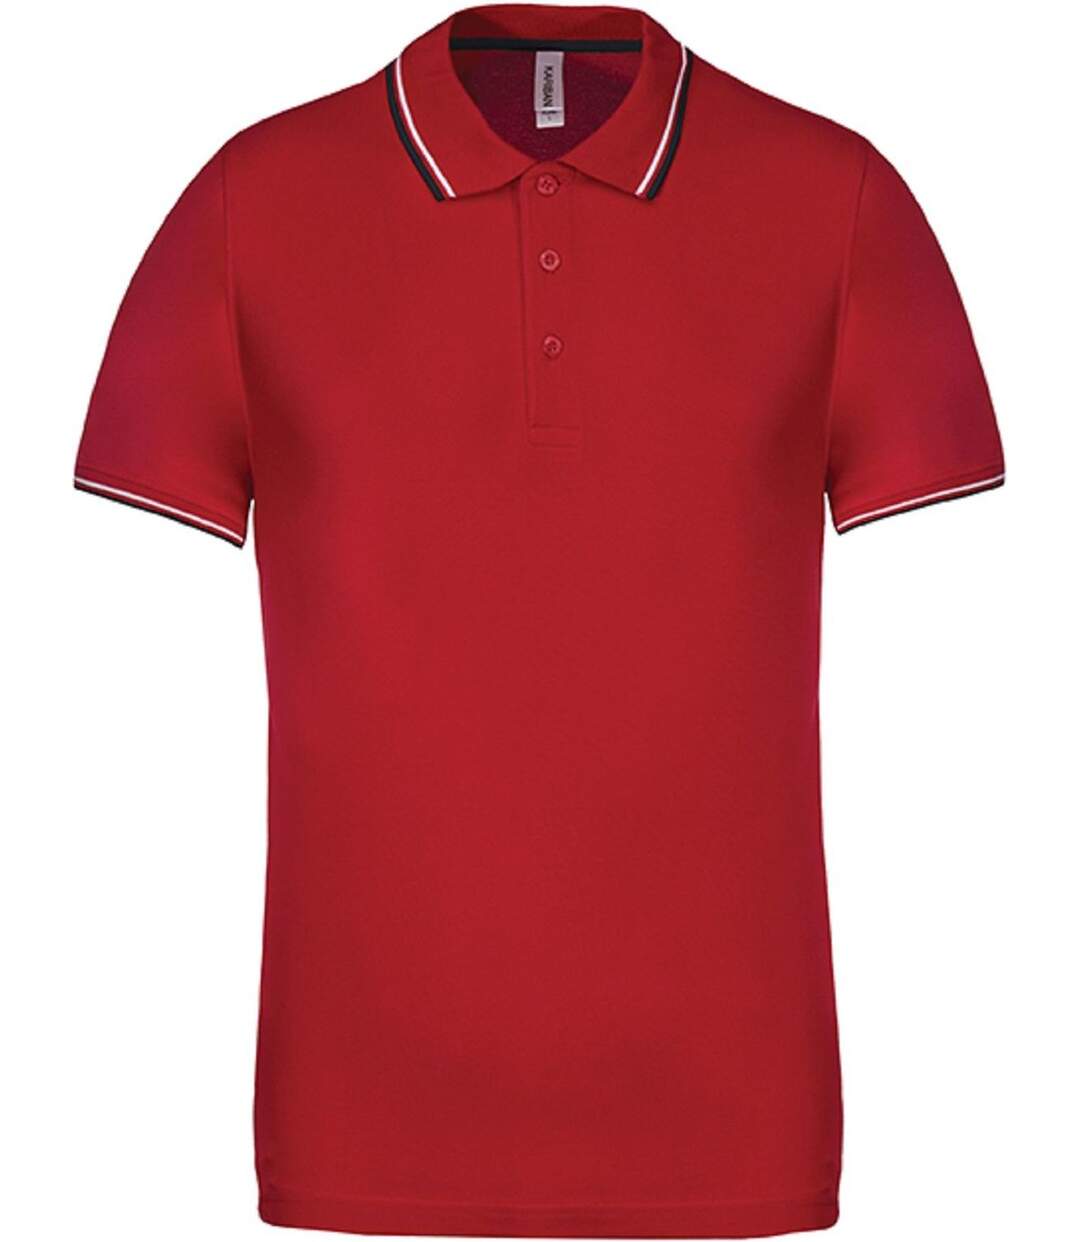 Polo bandes contrastées homme - K250 - rouge -navy-white - manches courtes